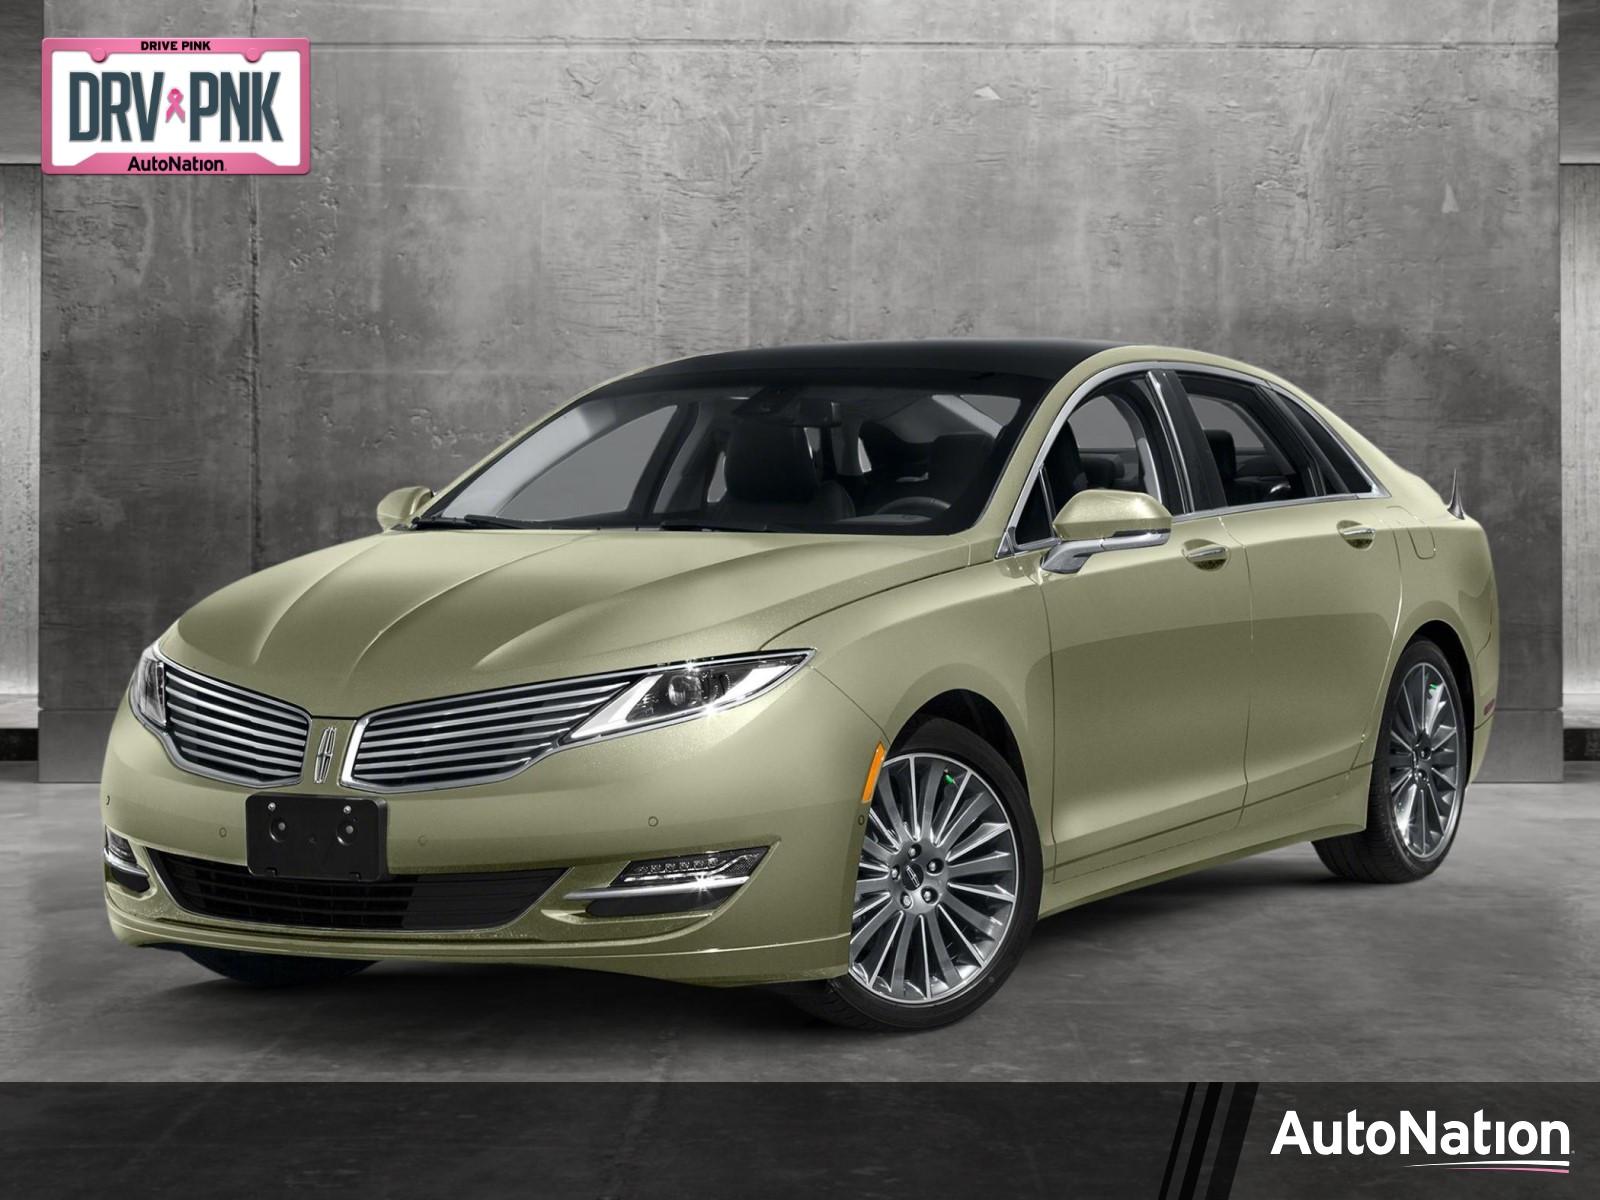 2016 Lincoln MKZ Vehicle Photo in Clearwater, FL 33765